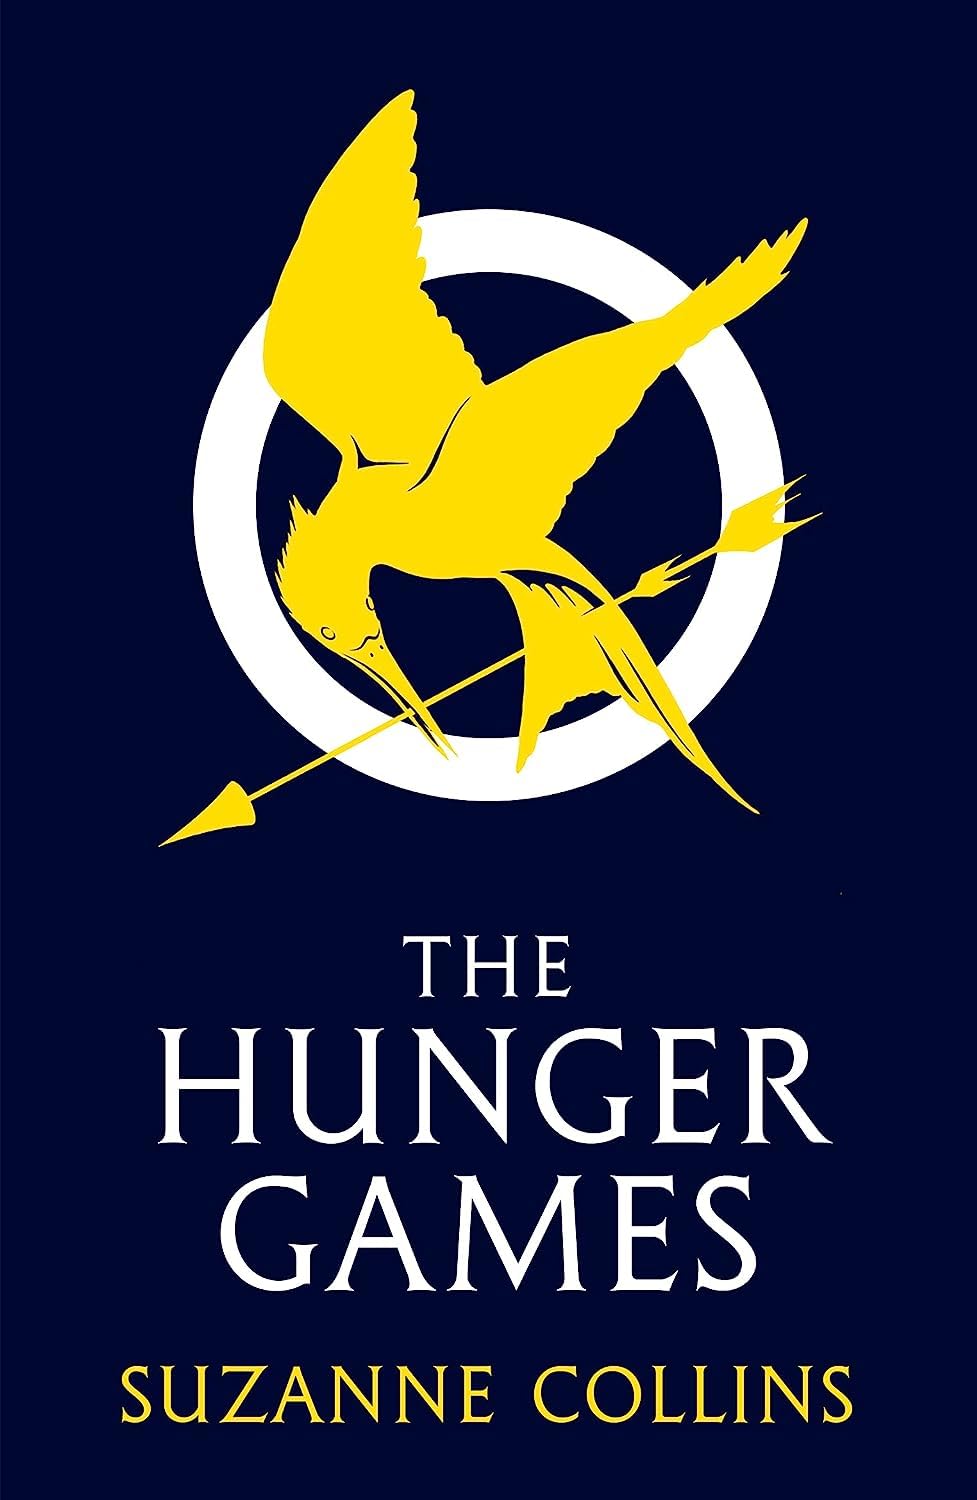 The Hunger Games - LTR-DECJAN2024, SALE, SCHOLASTIC UK, SUZANNE COLLINS, YOUNG ADULT